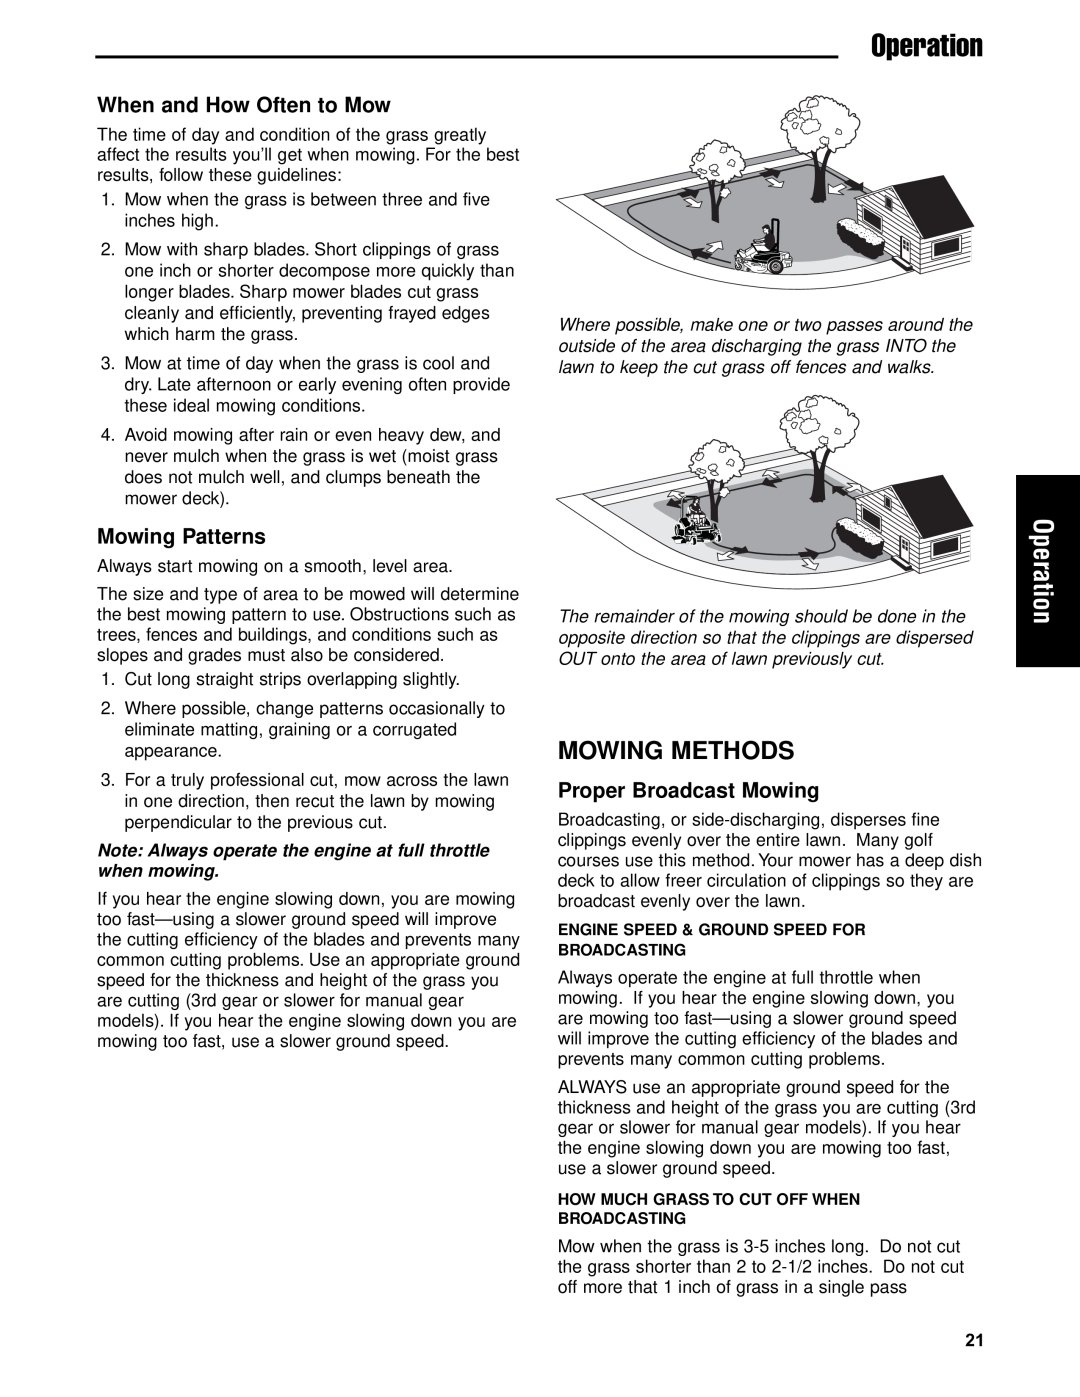 Briggs & Stratton 5900612 Mowing Methods, Operation, When and How Often to Mow, Mowing Patterns, Proper Broadcast Mowing 